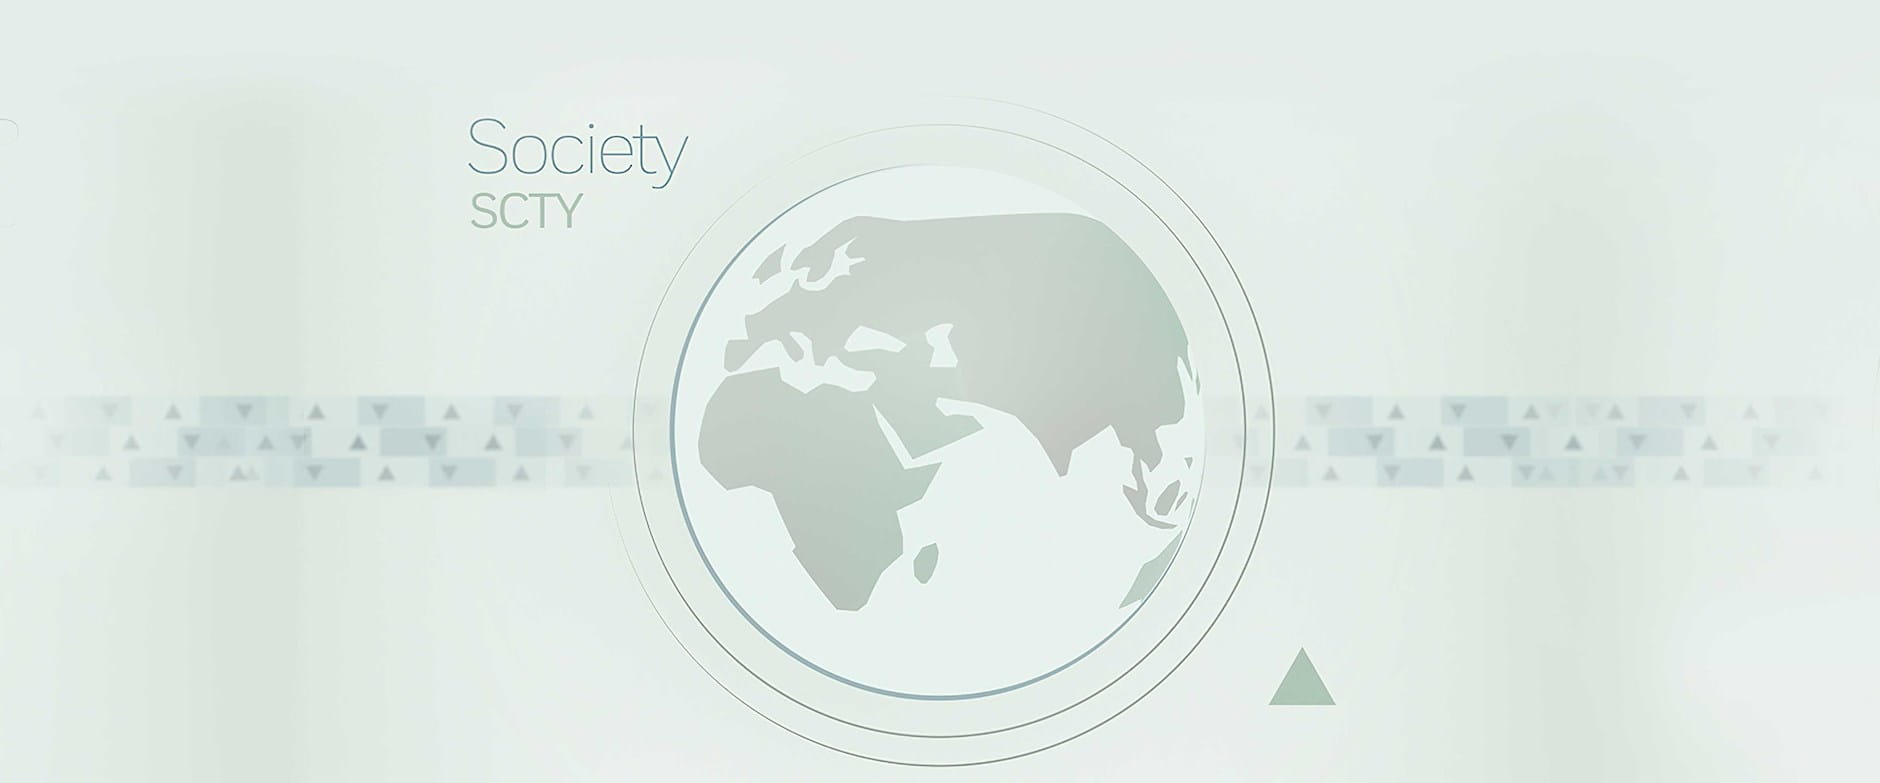 An illustration of the world with the stock market ticker symbol "SCTY" (Society)